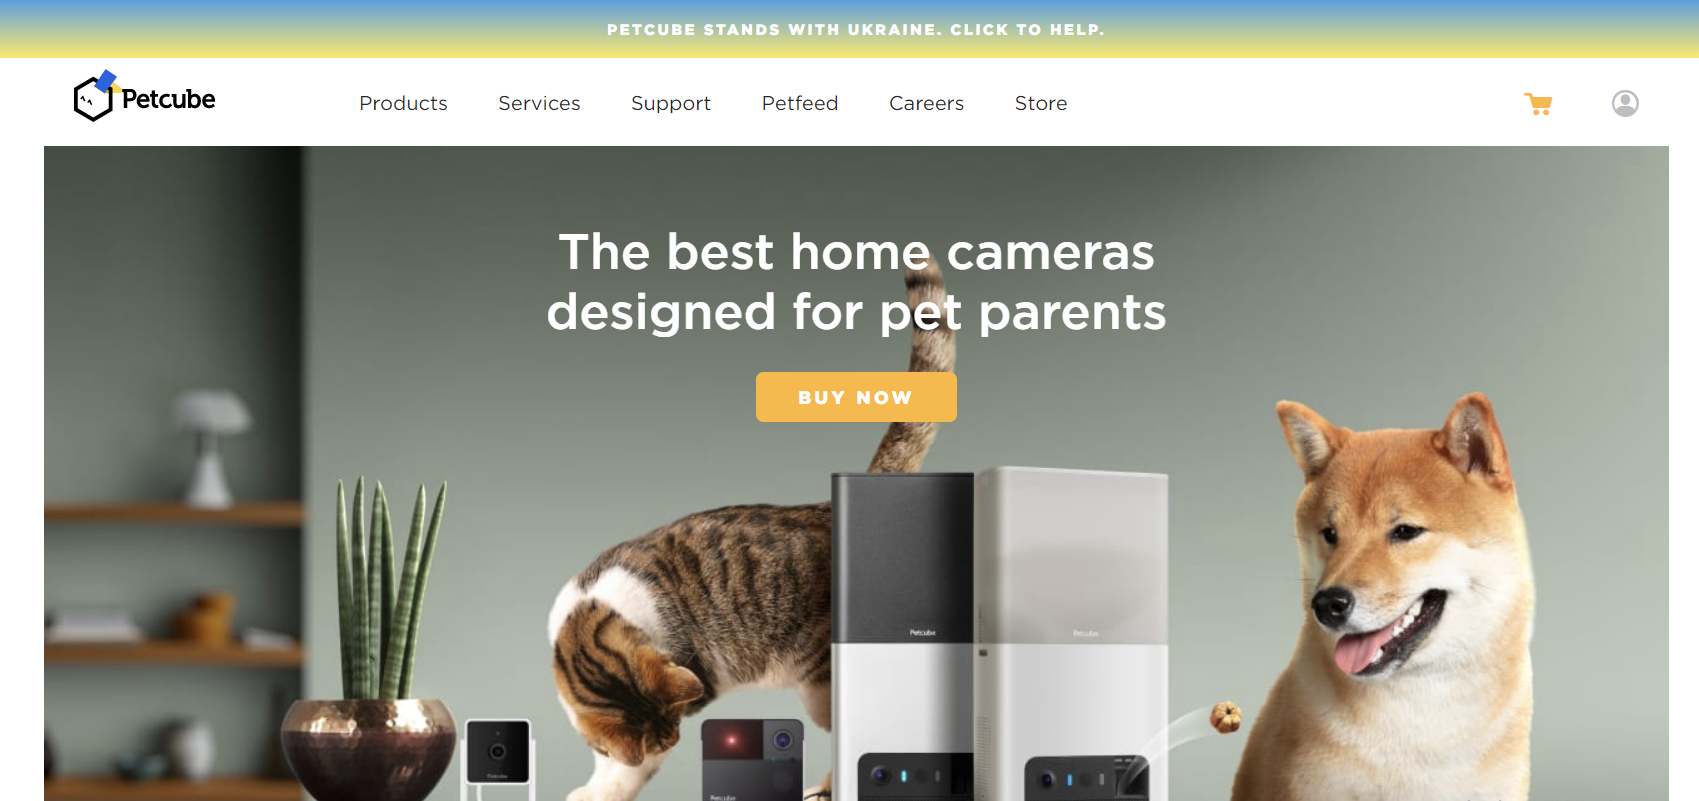 Petcube is a developer of interactive camera devices